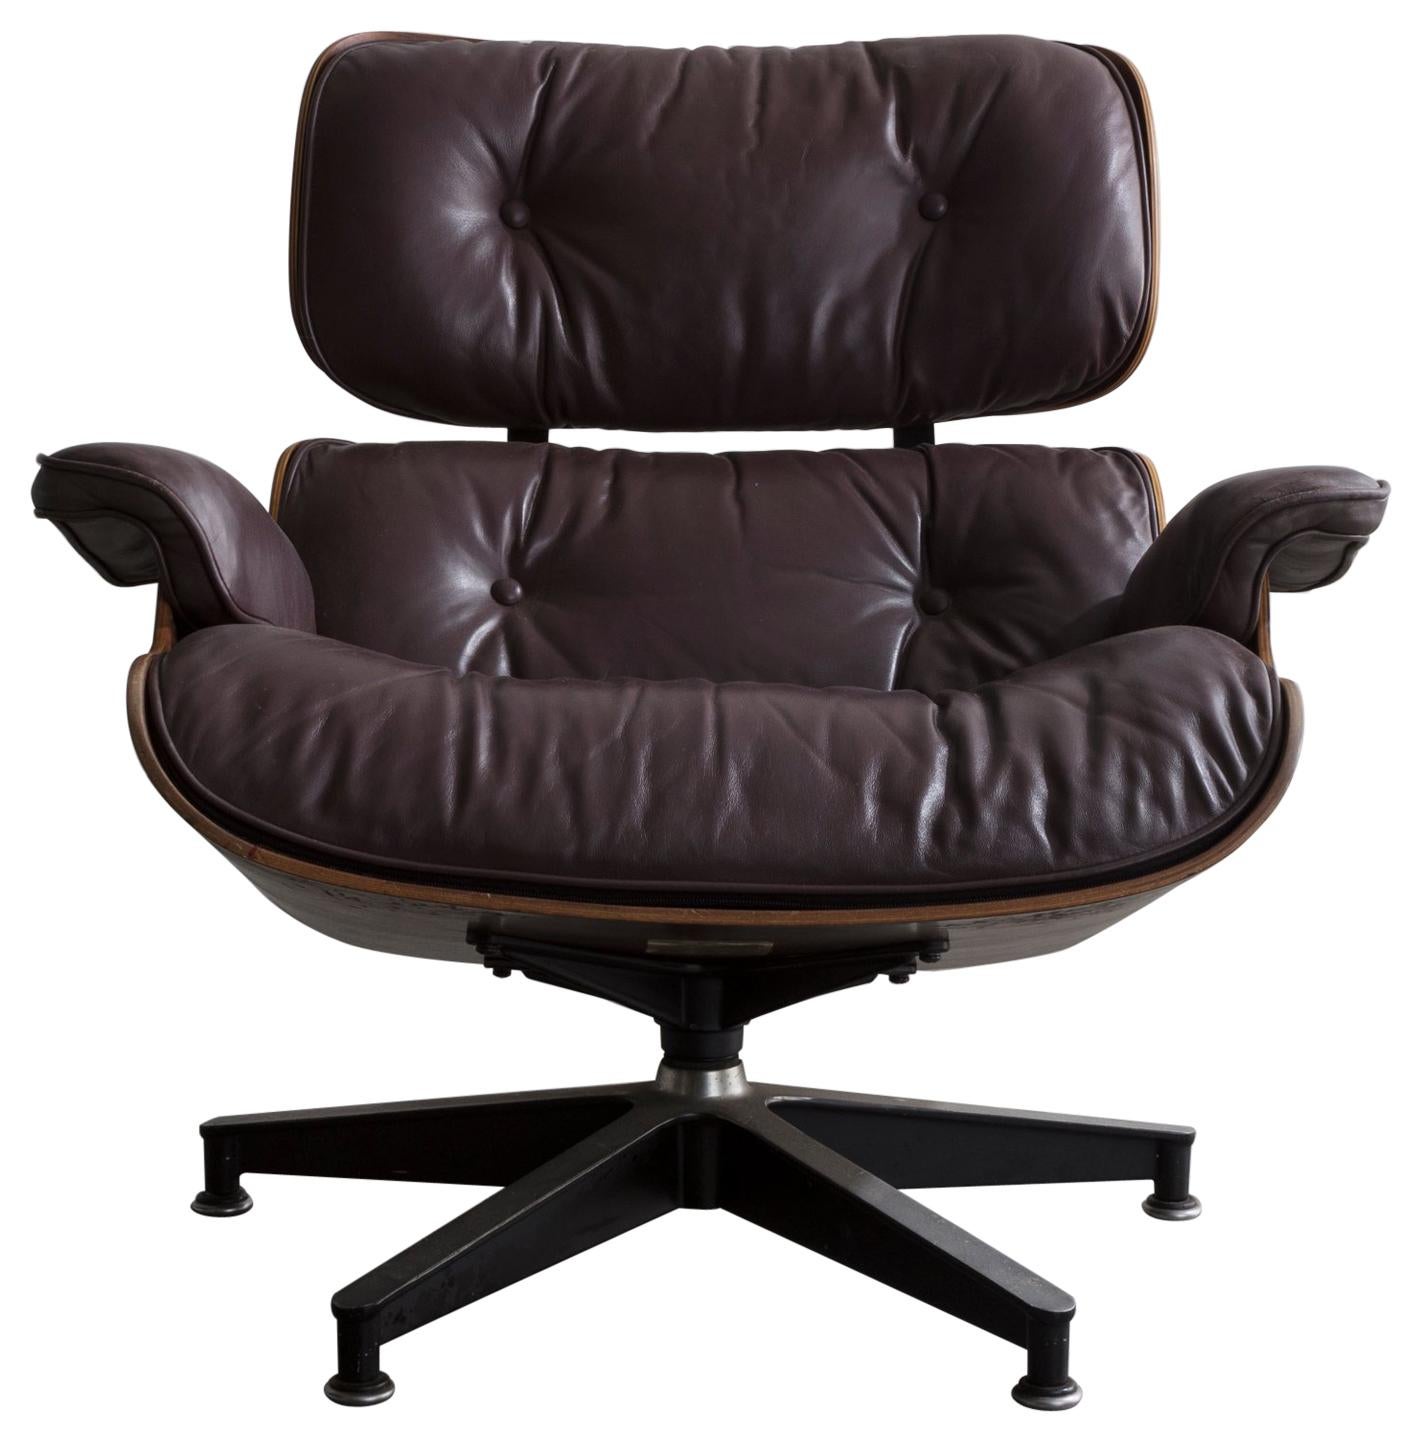 670 Lounge Chair & Ottoman in Rosewood & Leather by Charles and Ray Eames, 1958